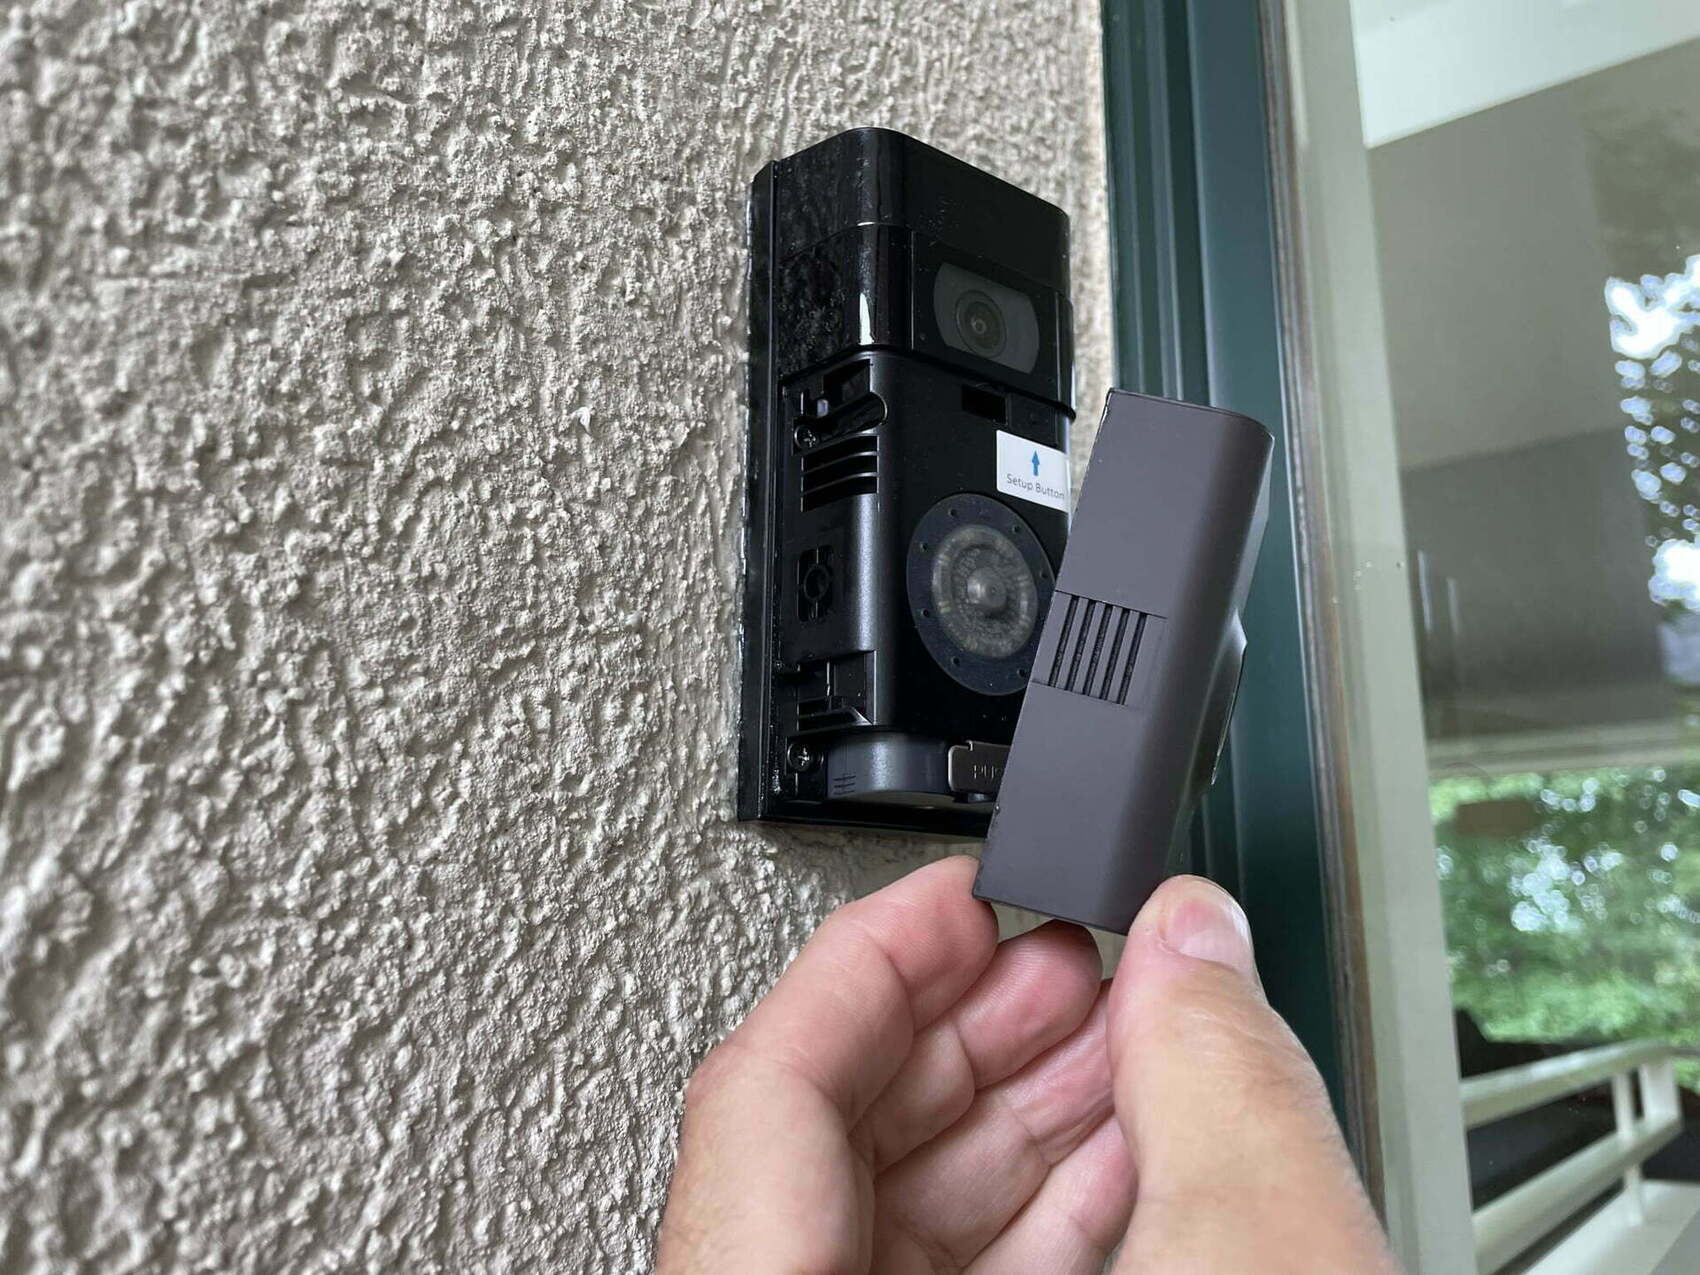 How To Remove Cover From Ring Doorbell